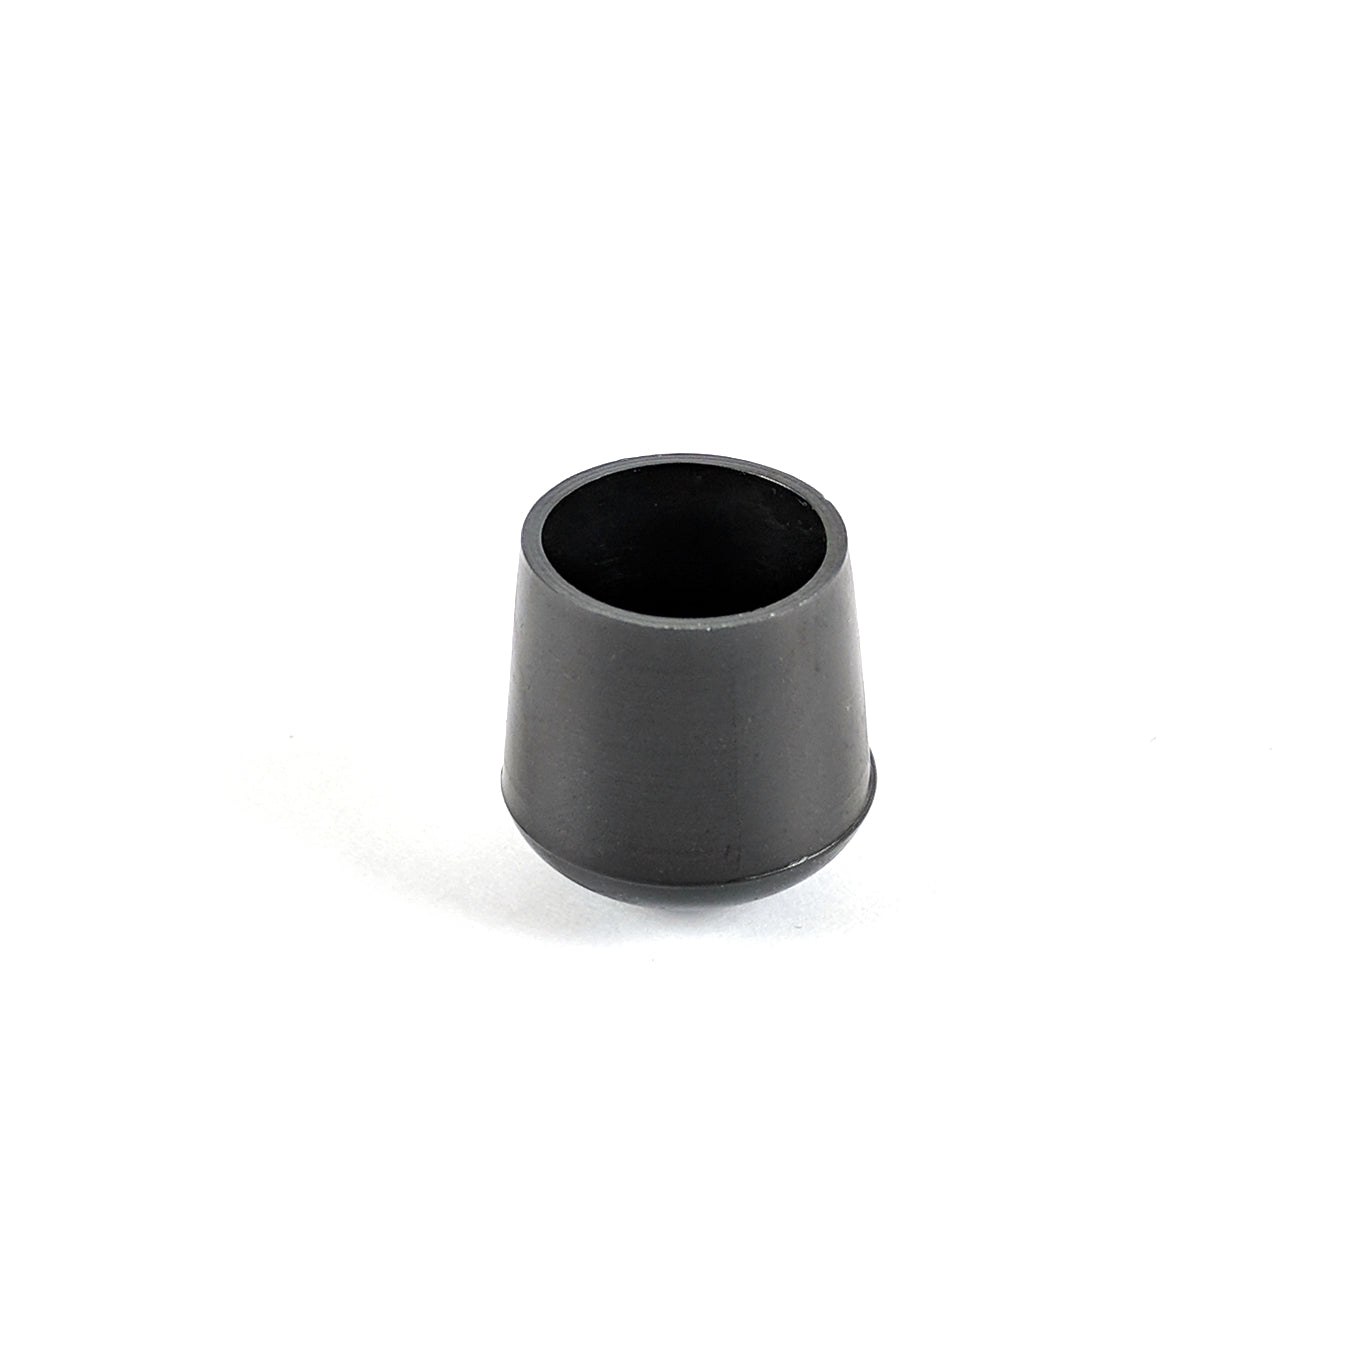 16mm Round Plastic Ferrules End Caps - Made in Germany - Keay Vital Parts